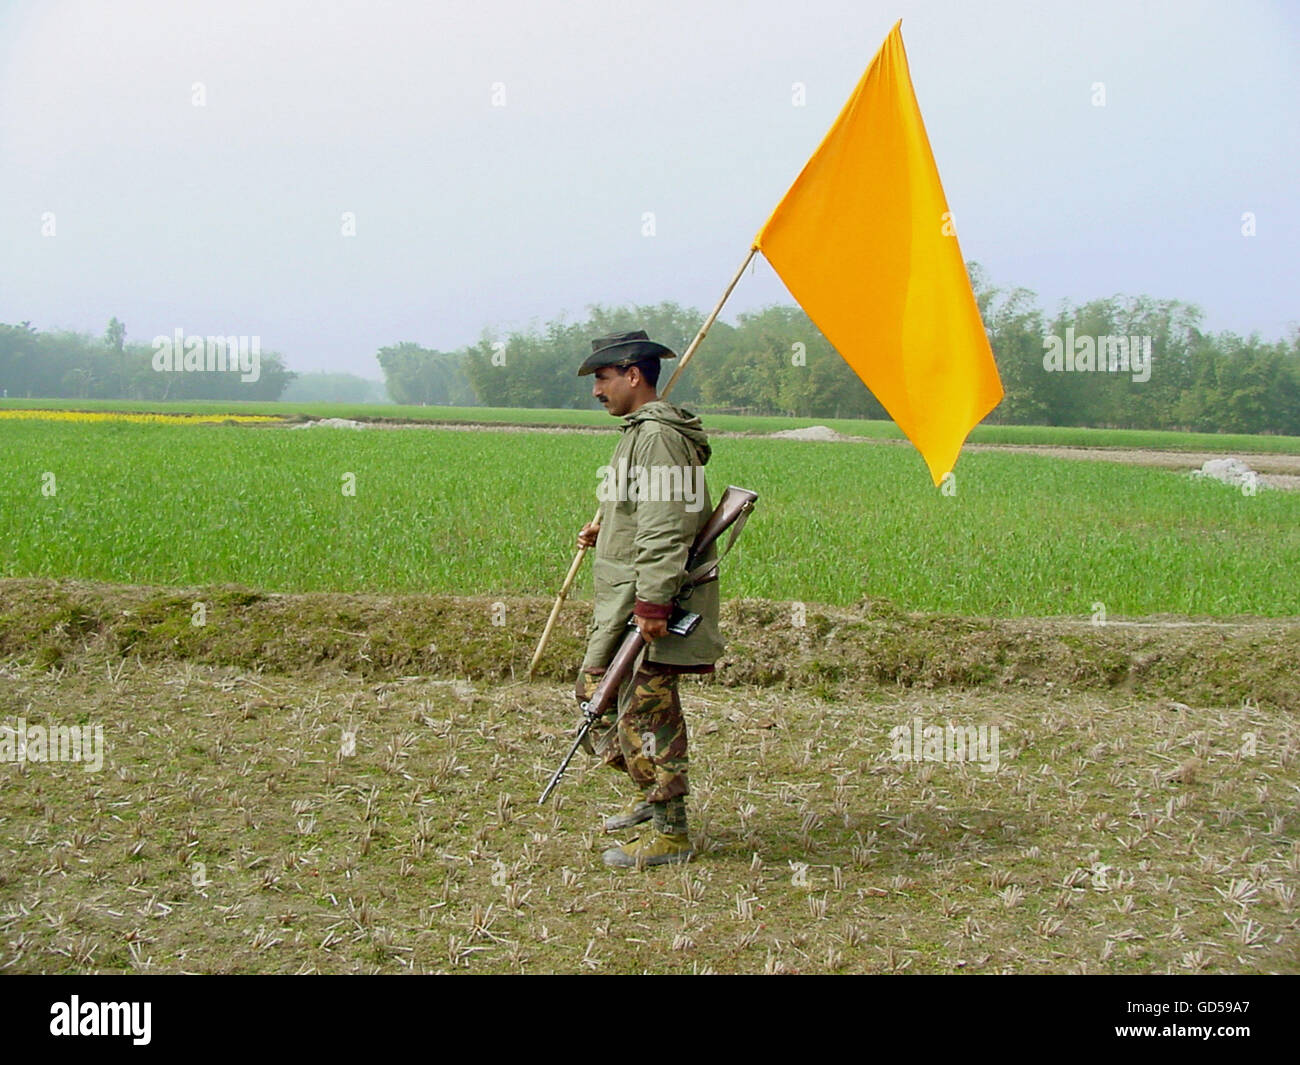 Army man holding a flag Stock Photo